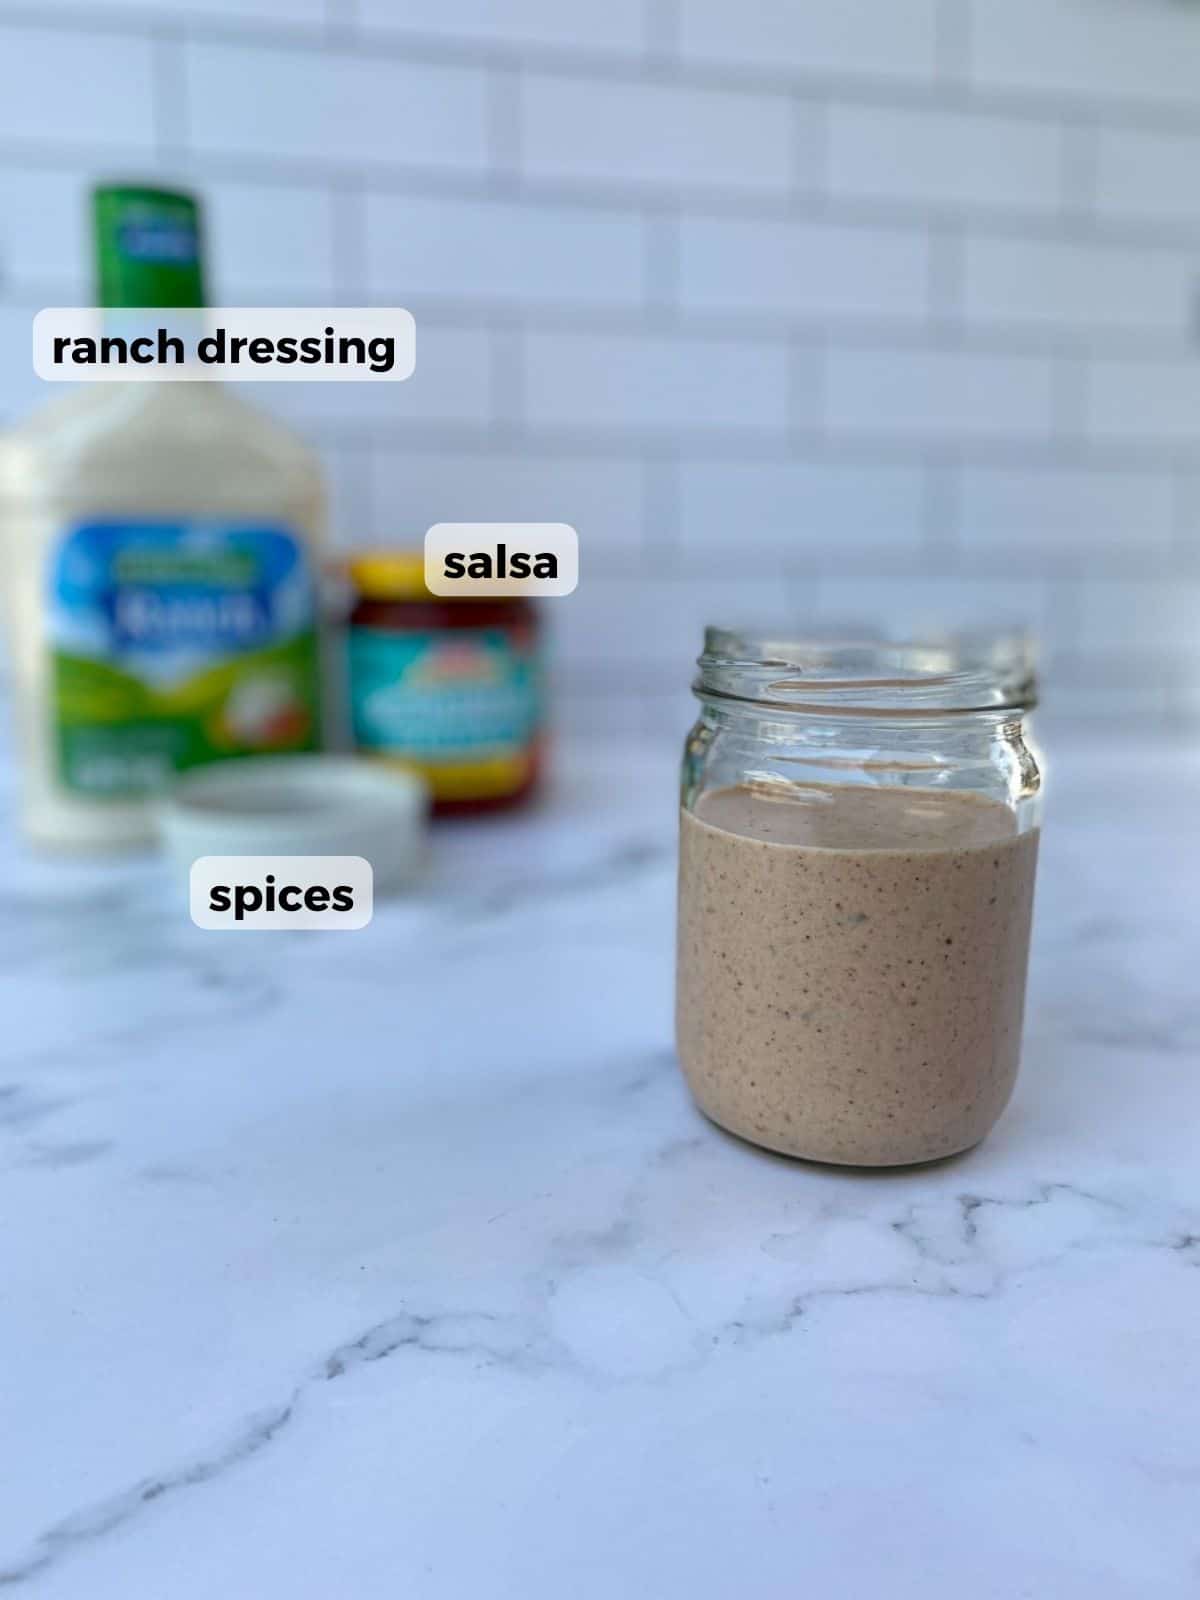 Ingredients needed to make salsa ranch dressing: spices, ranch dressing, and salsa.